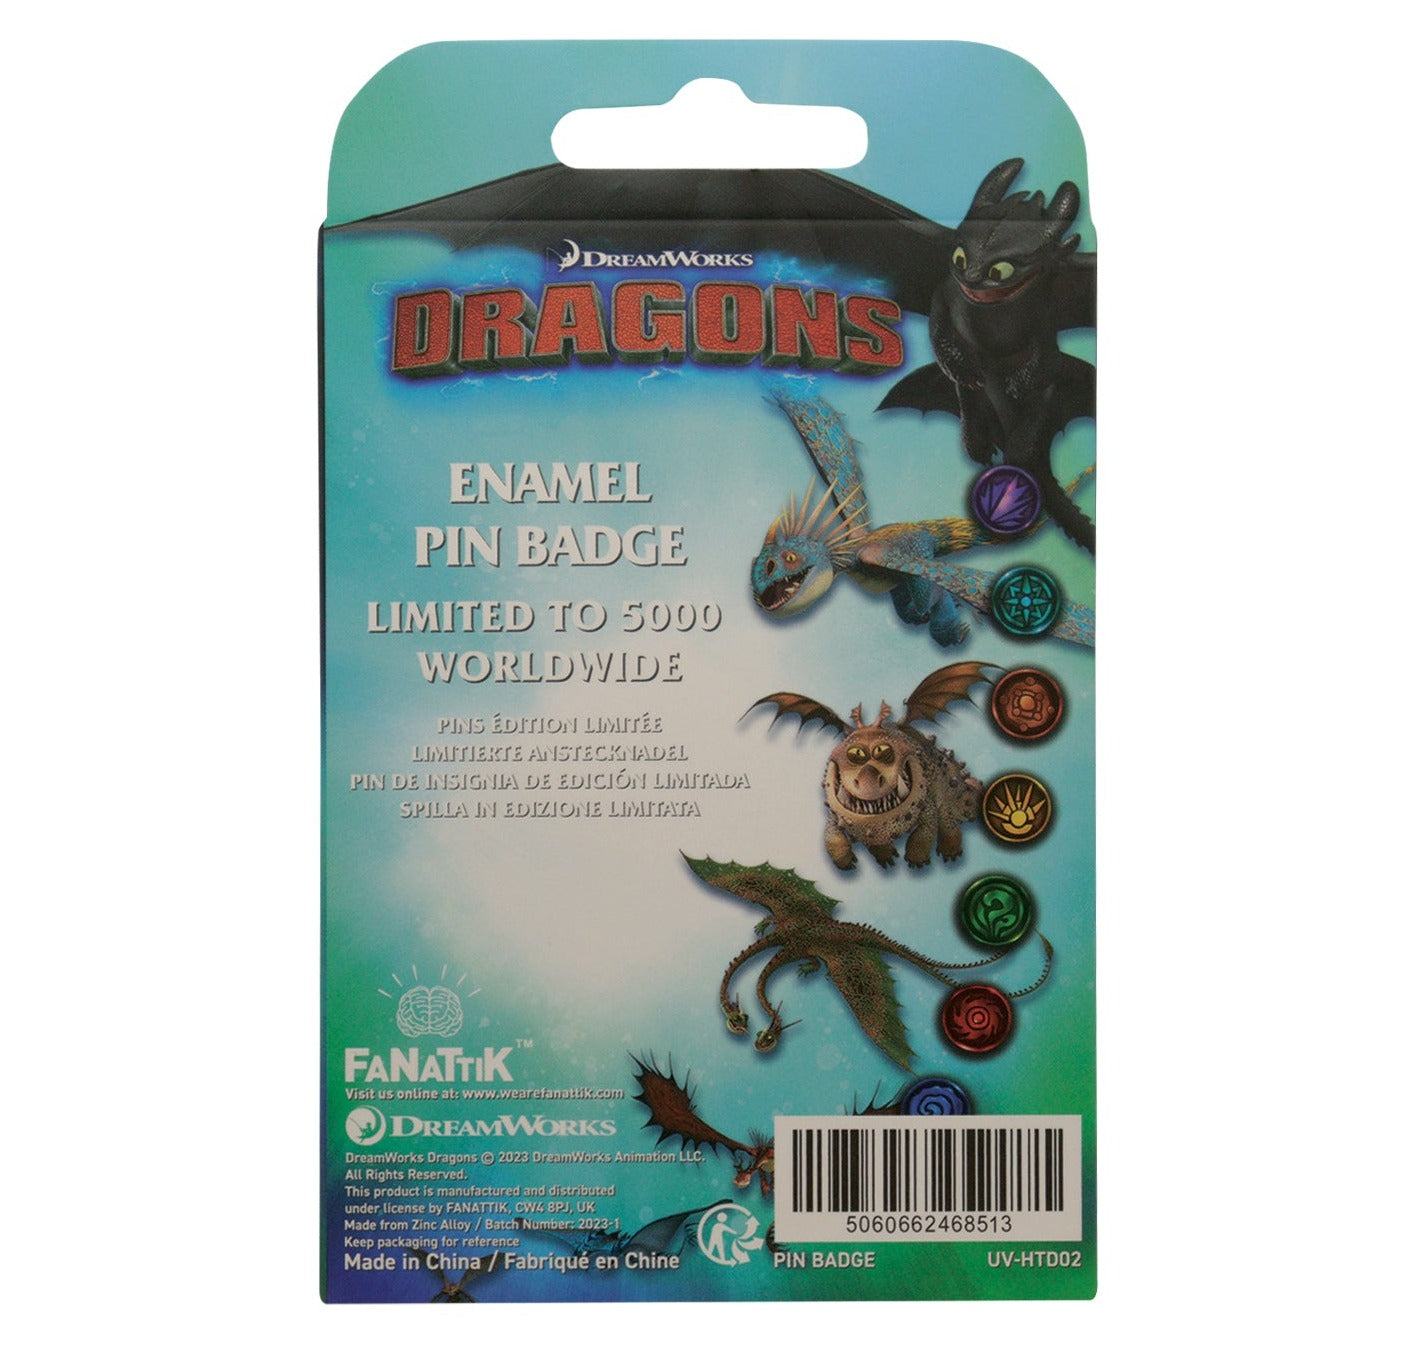 How to Train Your Dragon Limited Edition Pin Badge